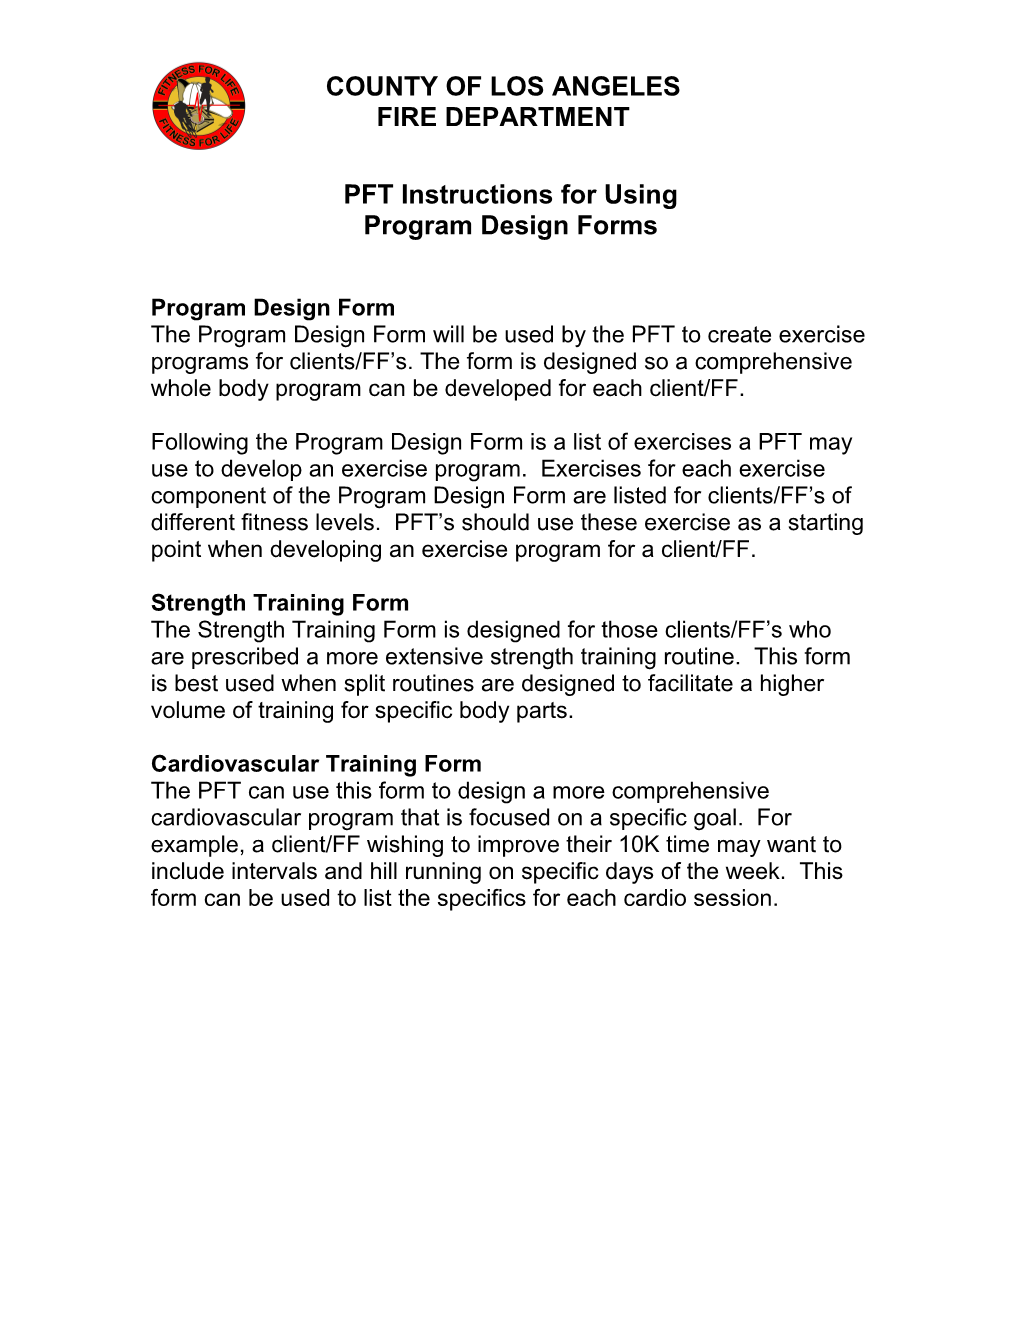 PFT Instructions for Using